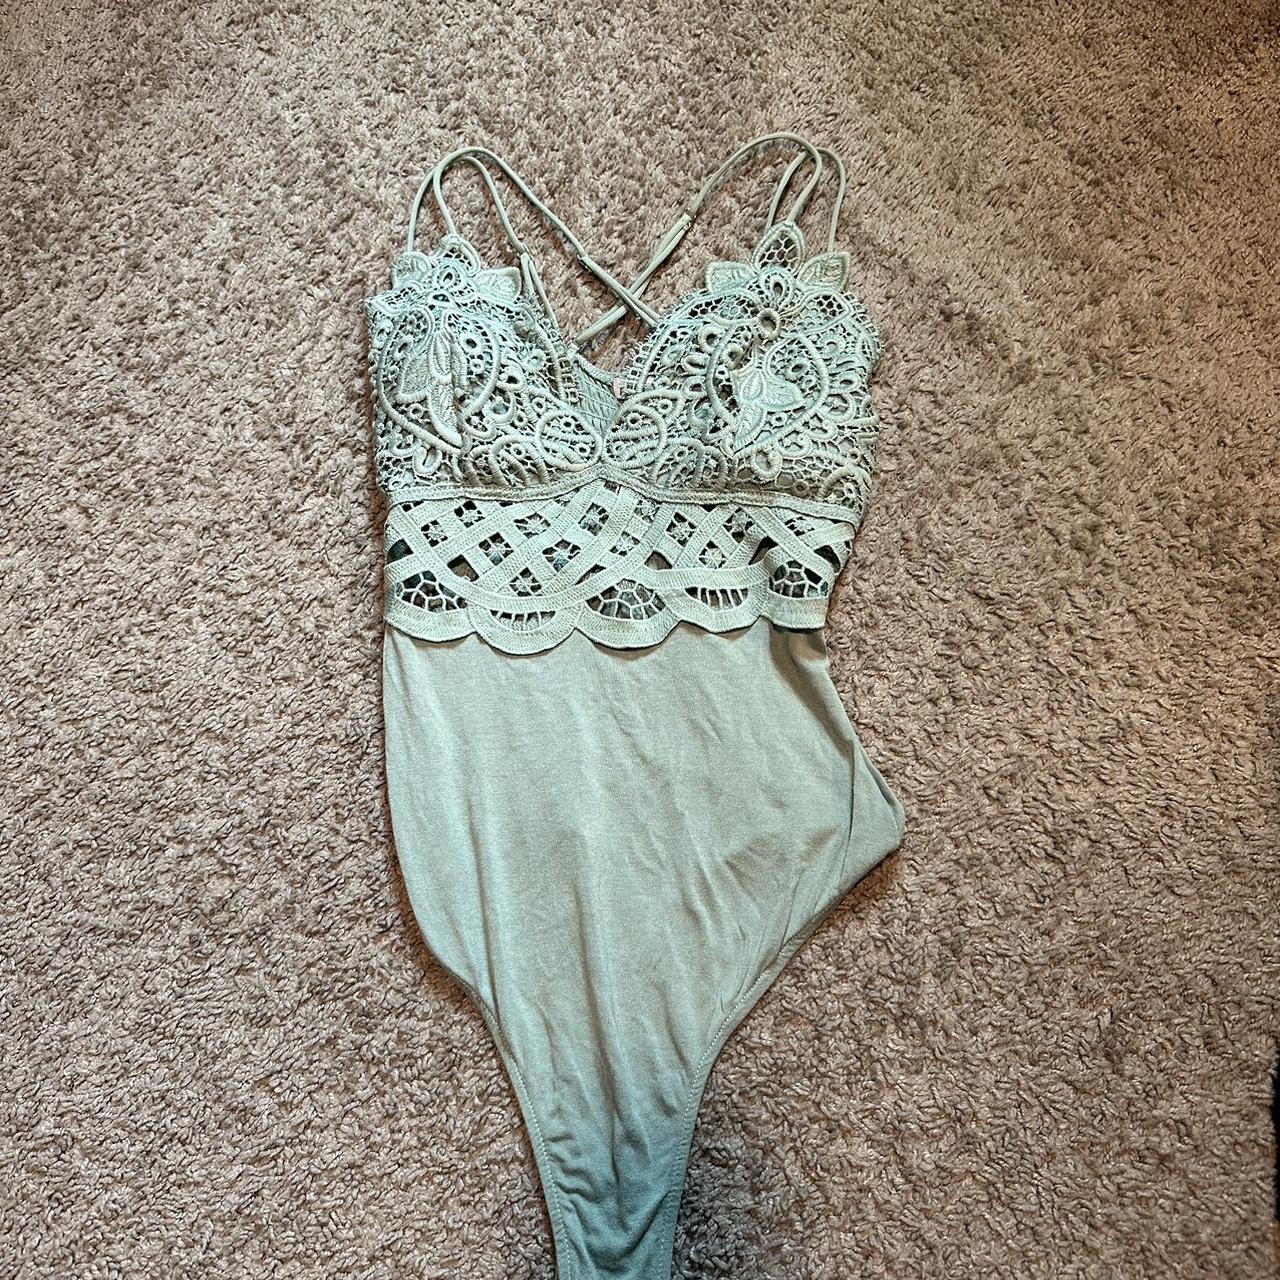 Rue21 Lace Up Bodysuits for Women